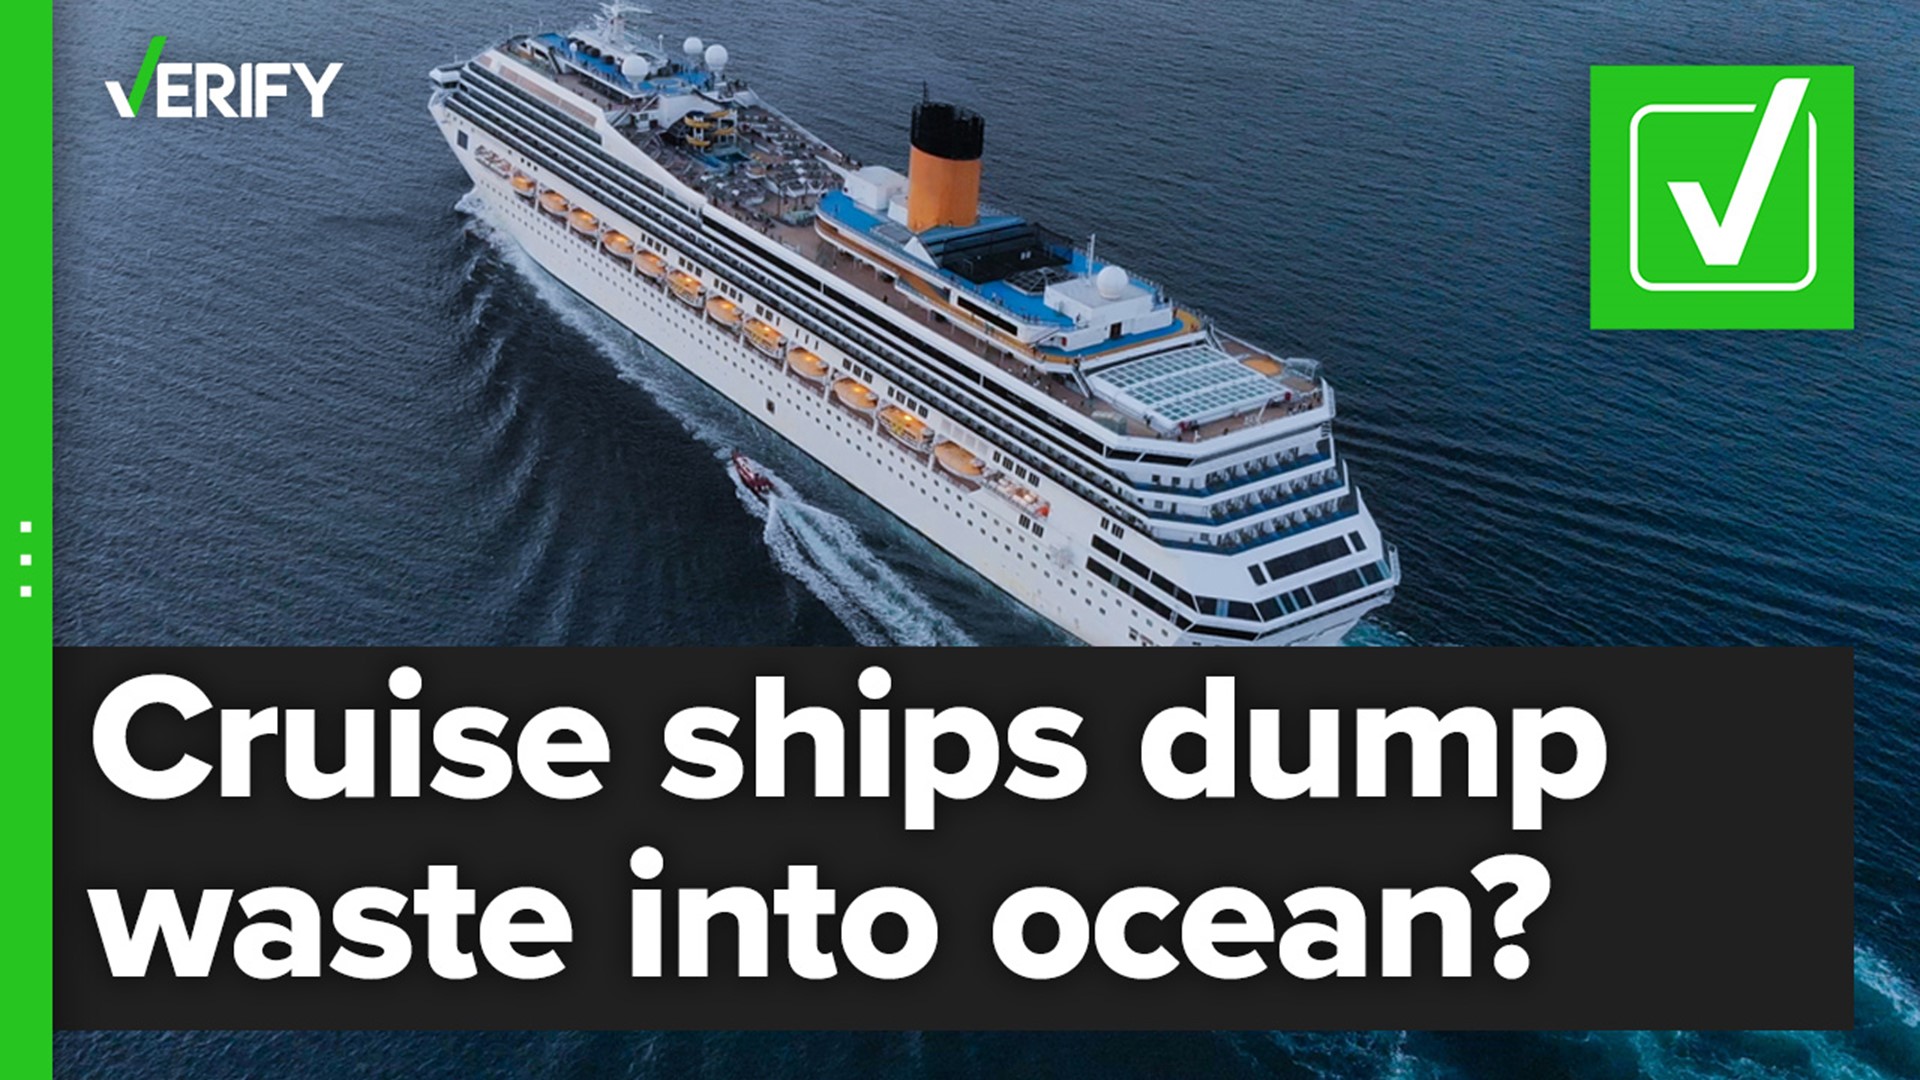 Cruise ships do dispose of waste into the ocean, but each ship must follow specific regulatory requirements when disposing of waste, according to the EPA.